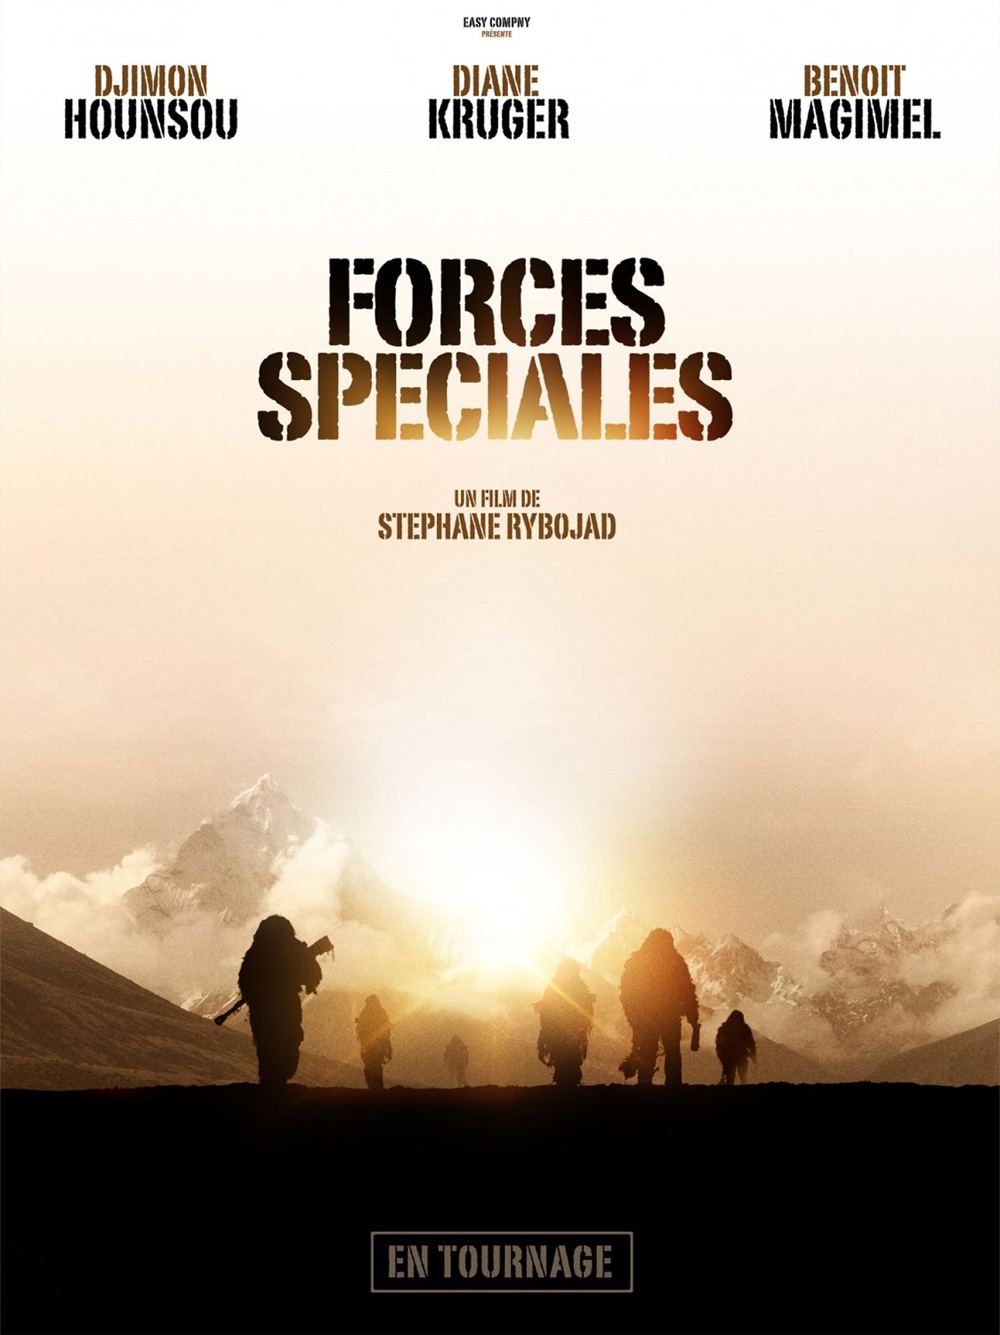 Poster Special Forces - Liberate l'ostaggio